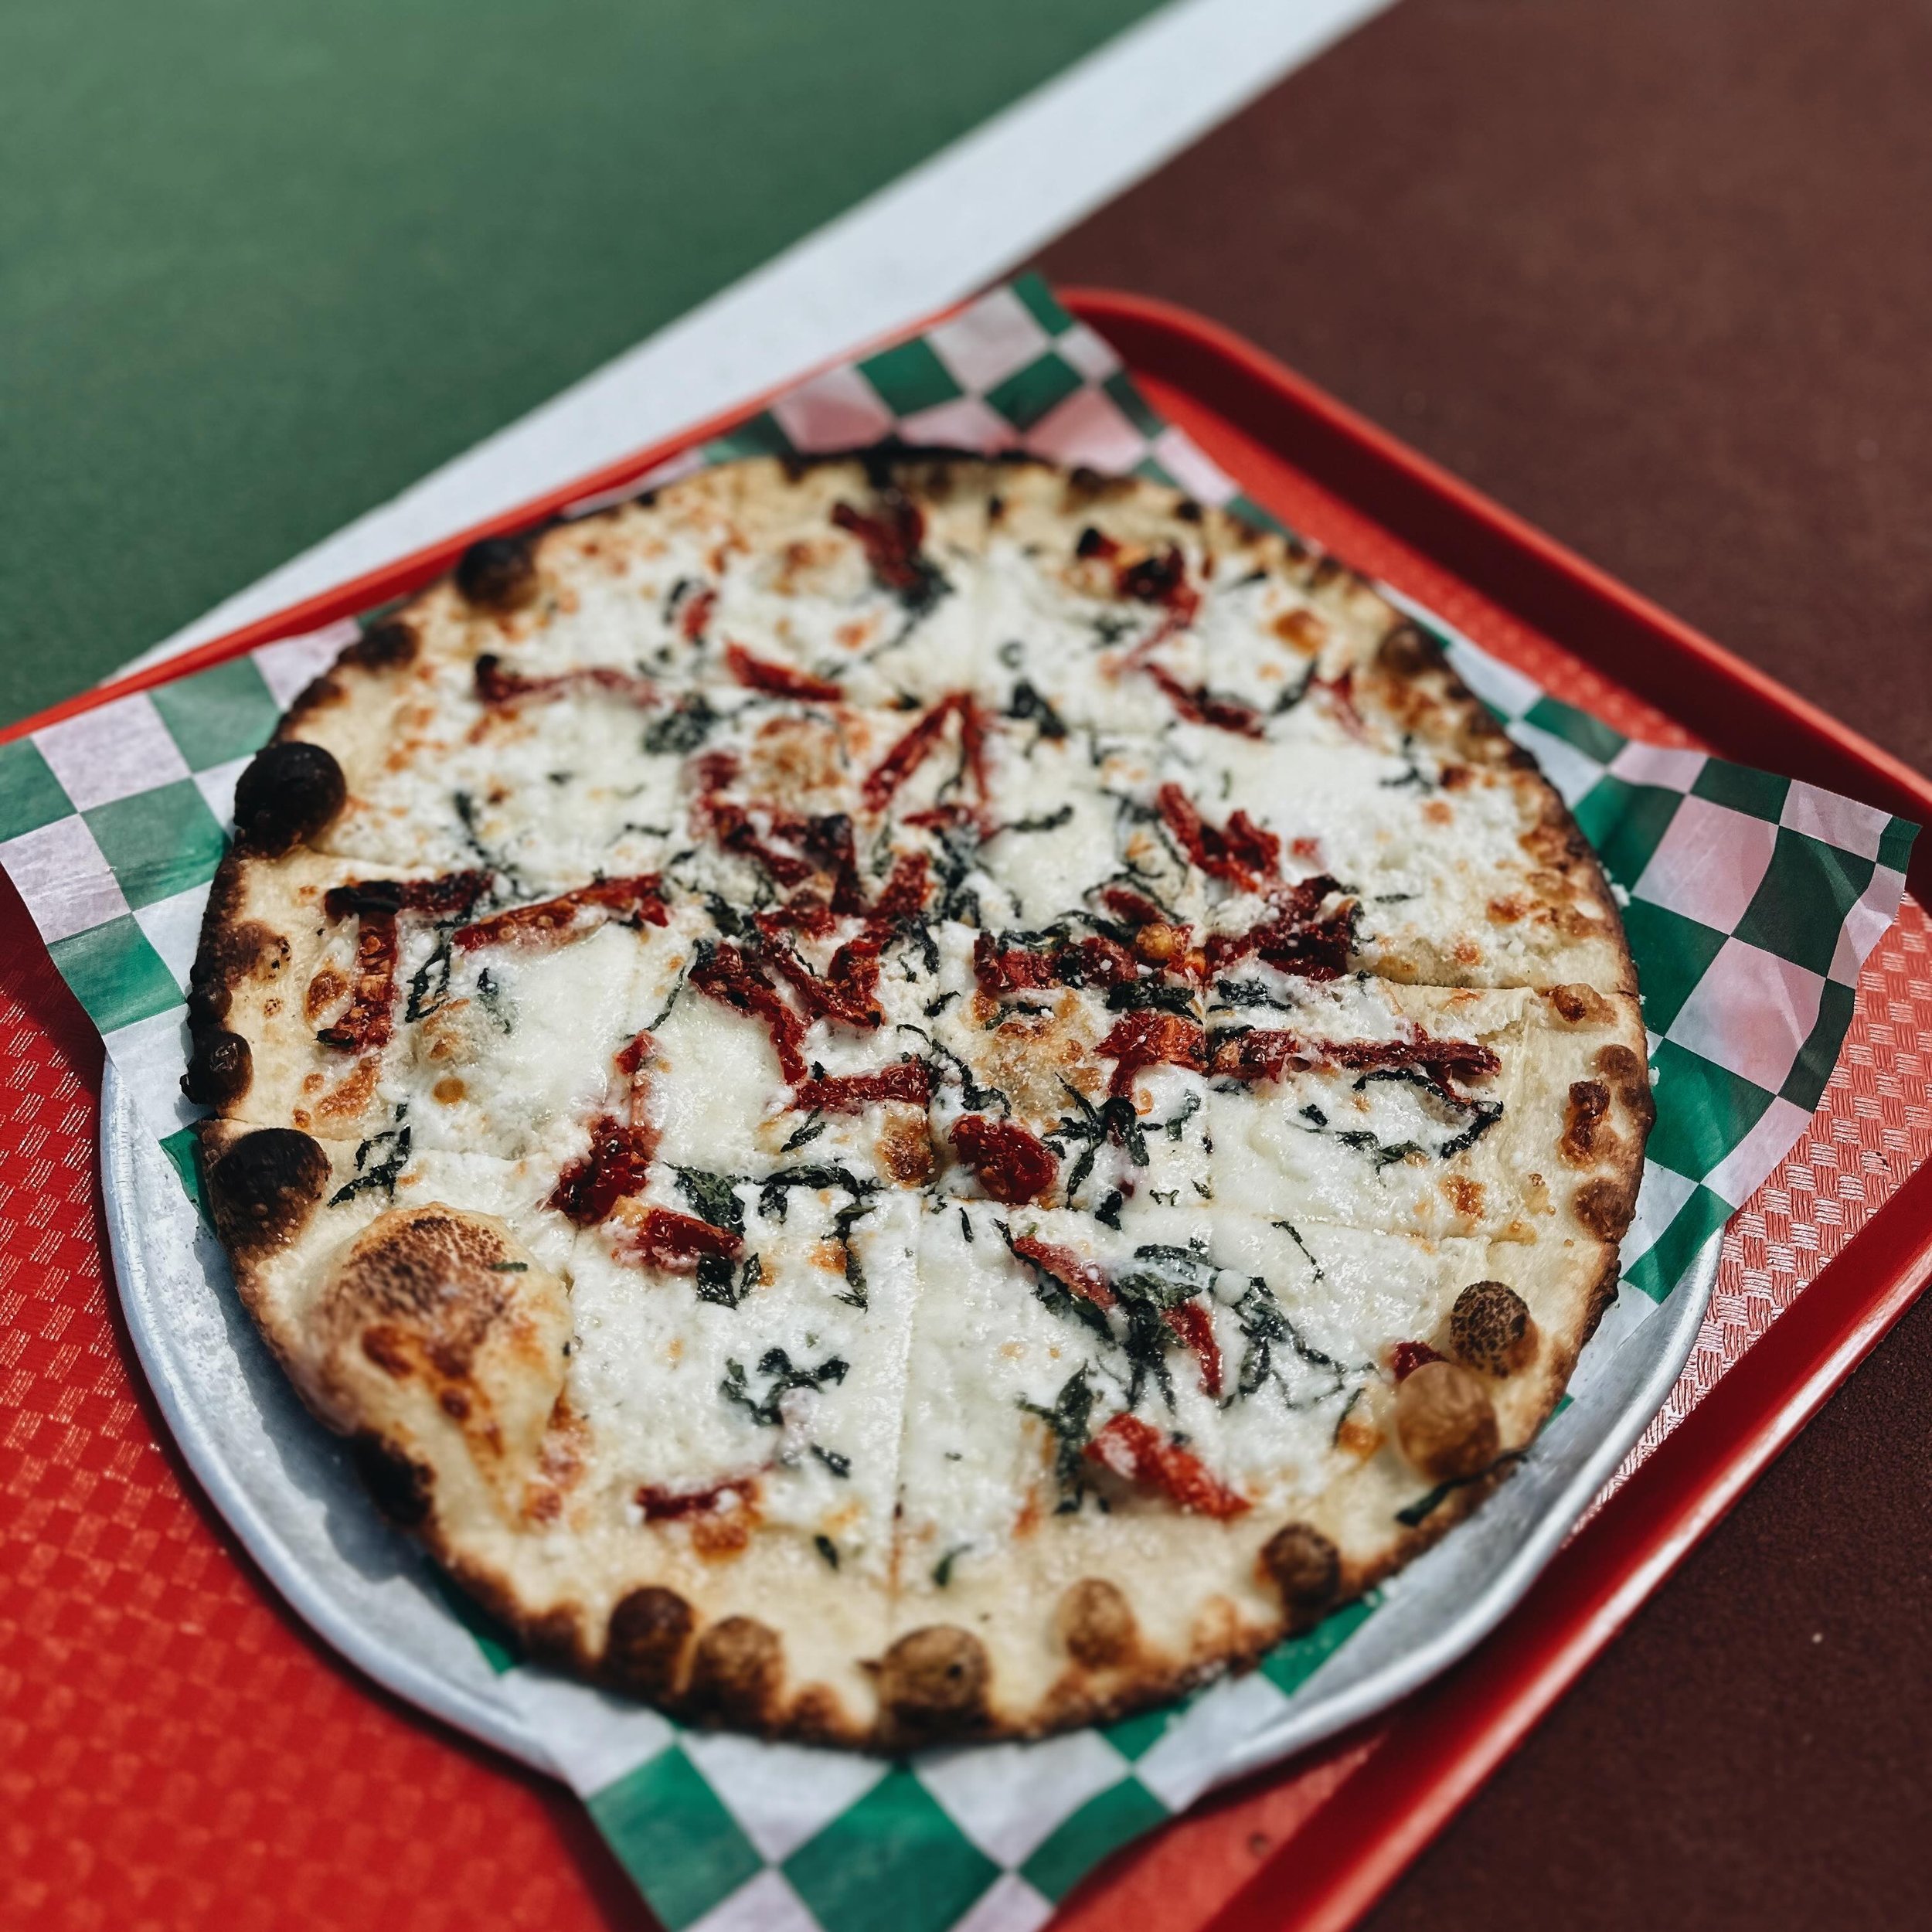 Our barrechella inspired special pizza this weekend! While supplies last!
5 cheese Margherita 
Whipped Ricotta 
Mozzarella 
Bocconcini
Parmesan 
Pecorino 
Sundried tomato 
Basil